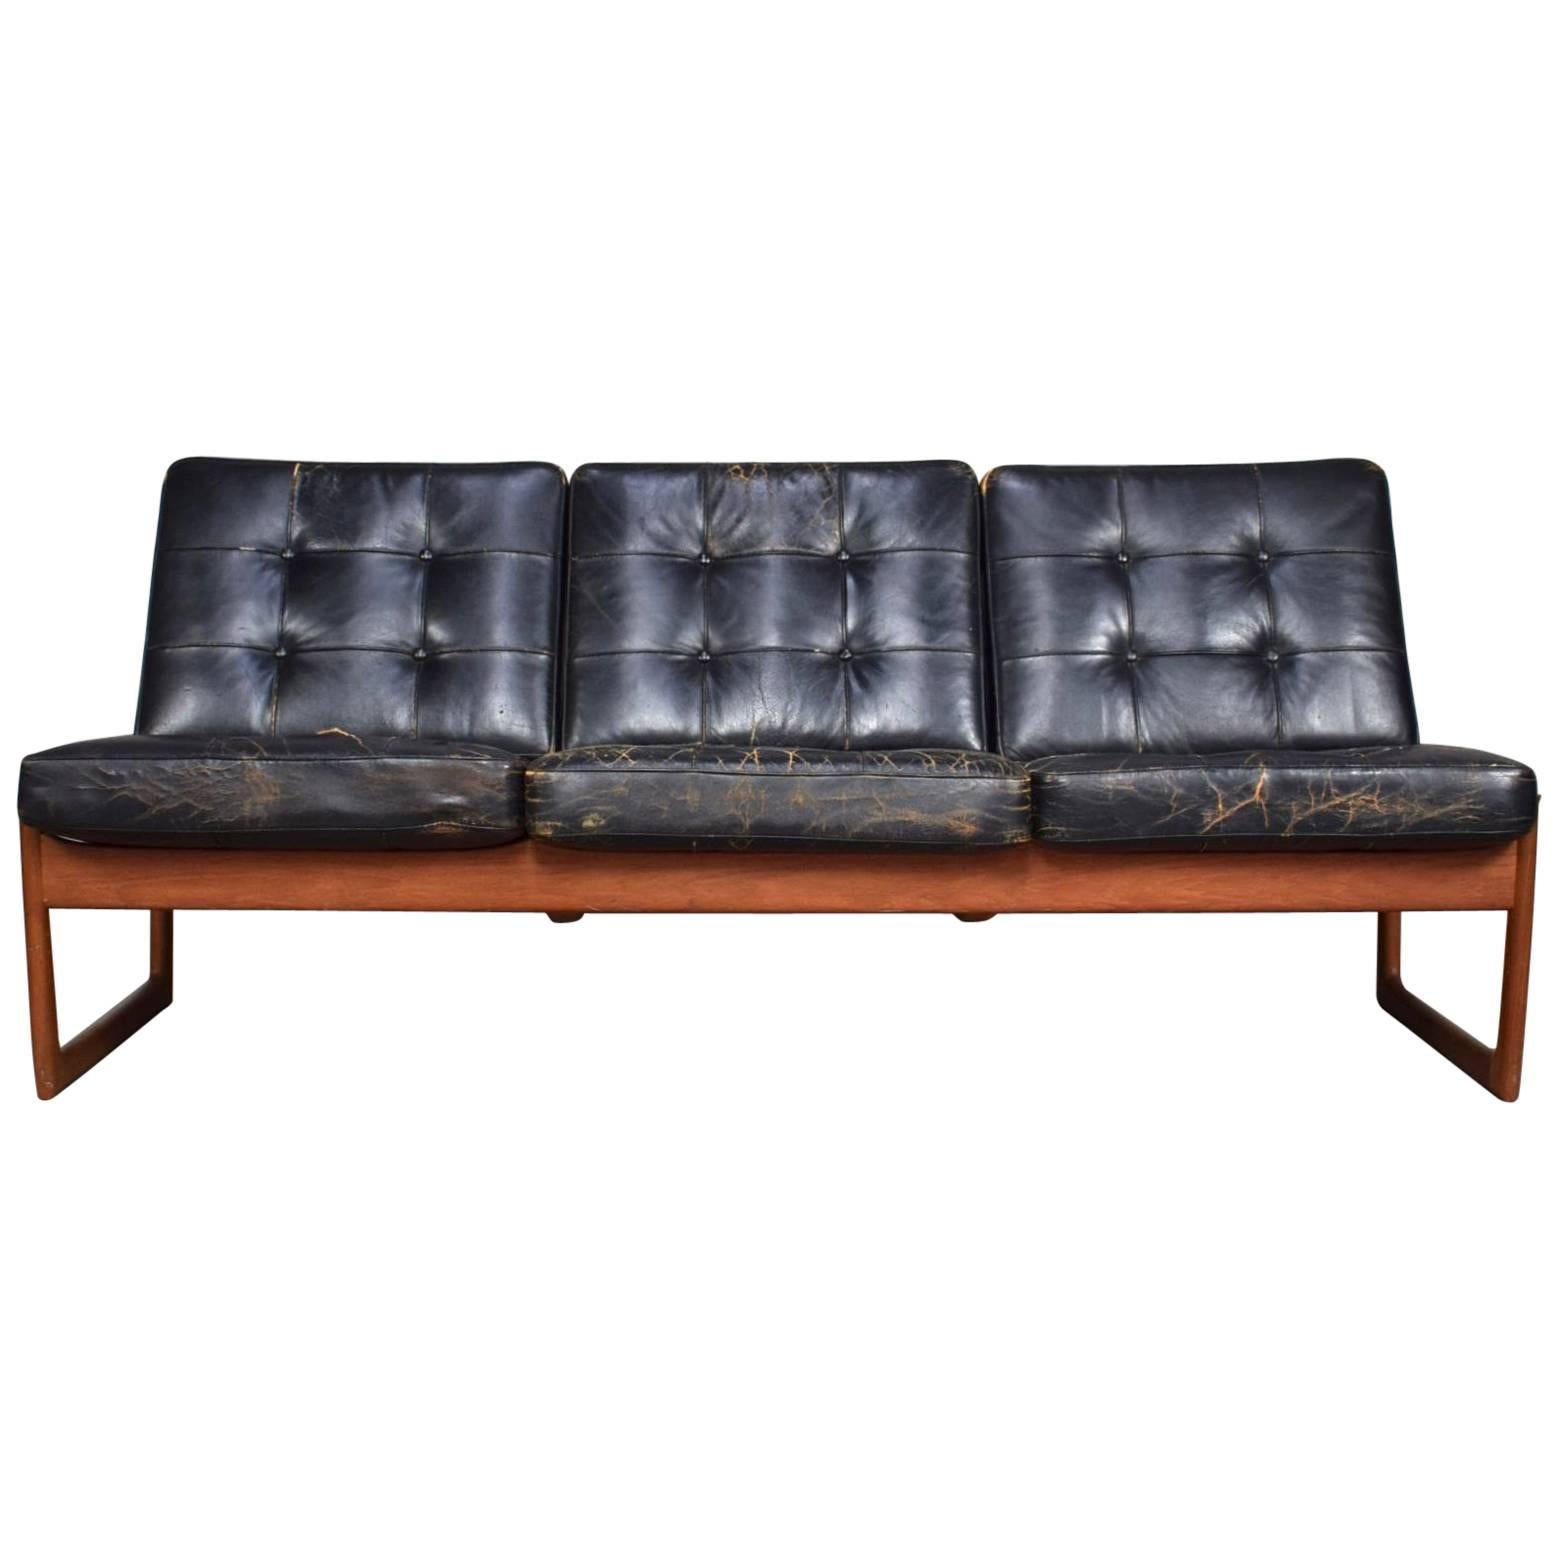 Teak and Leather Sofa Model FD130 by Hvidt and Molgaard-Nielsen, circa 1950